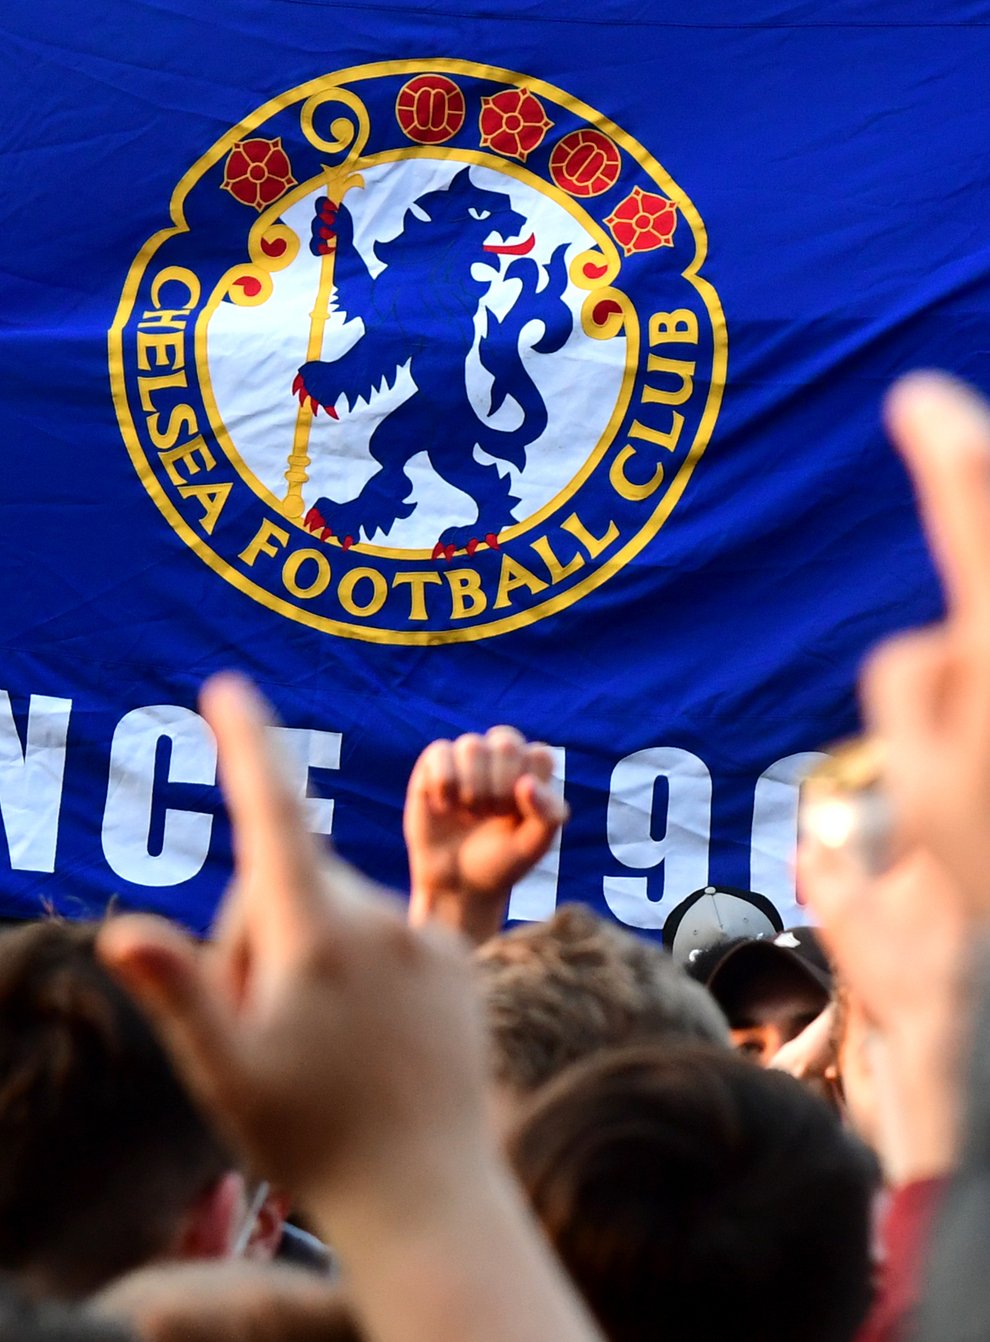 Culture Secretary Nadine Dorries cited Chelsea’s precarious situation as one example of why football needed an independent regulator (Ian West/PA)